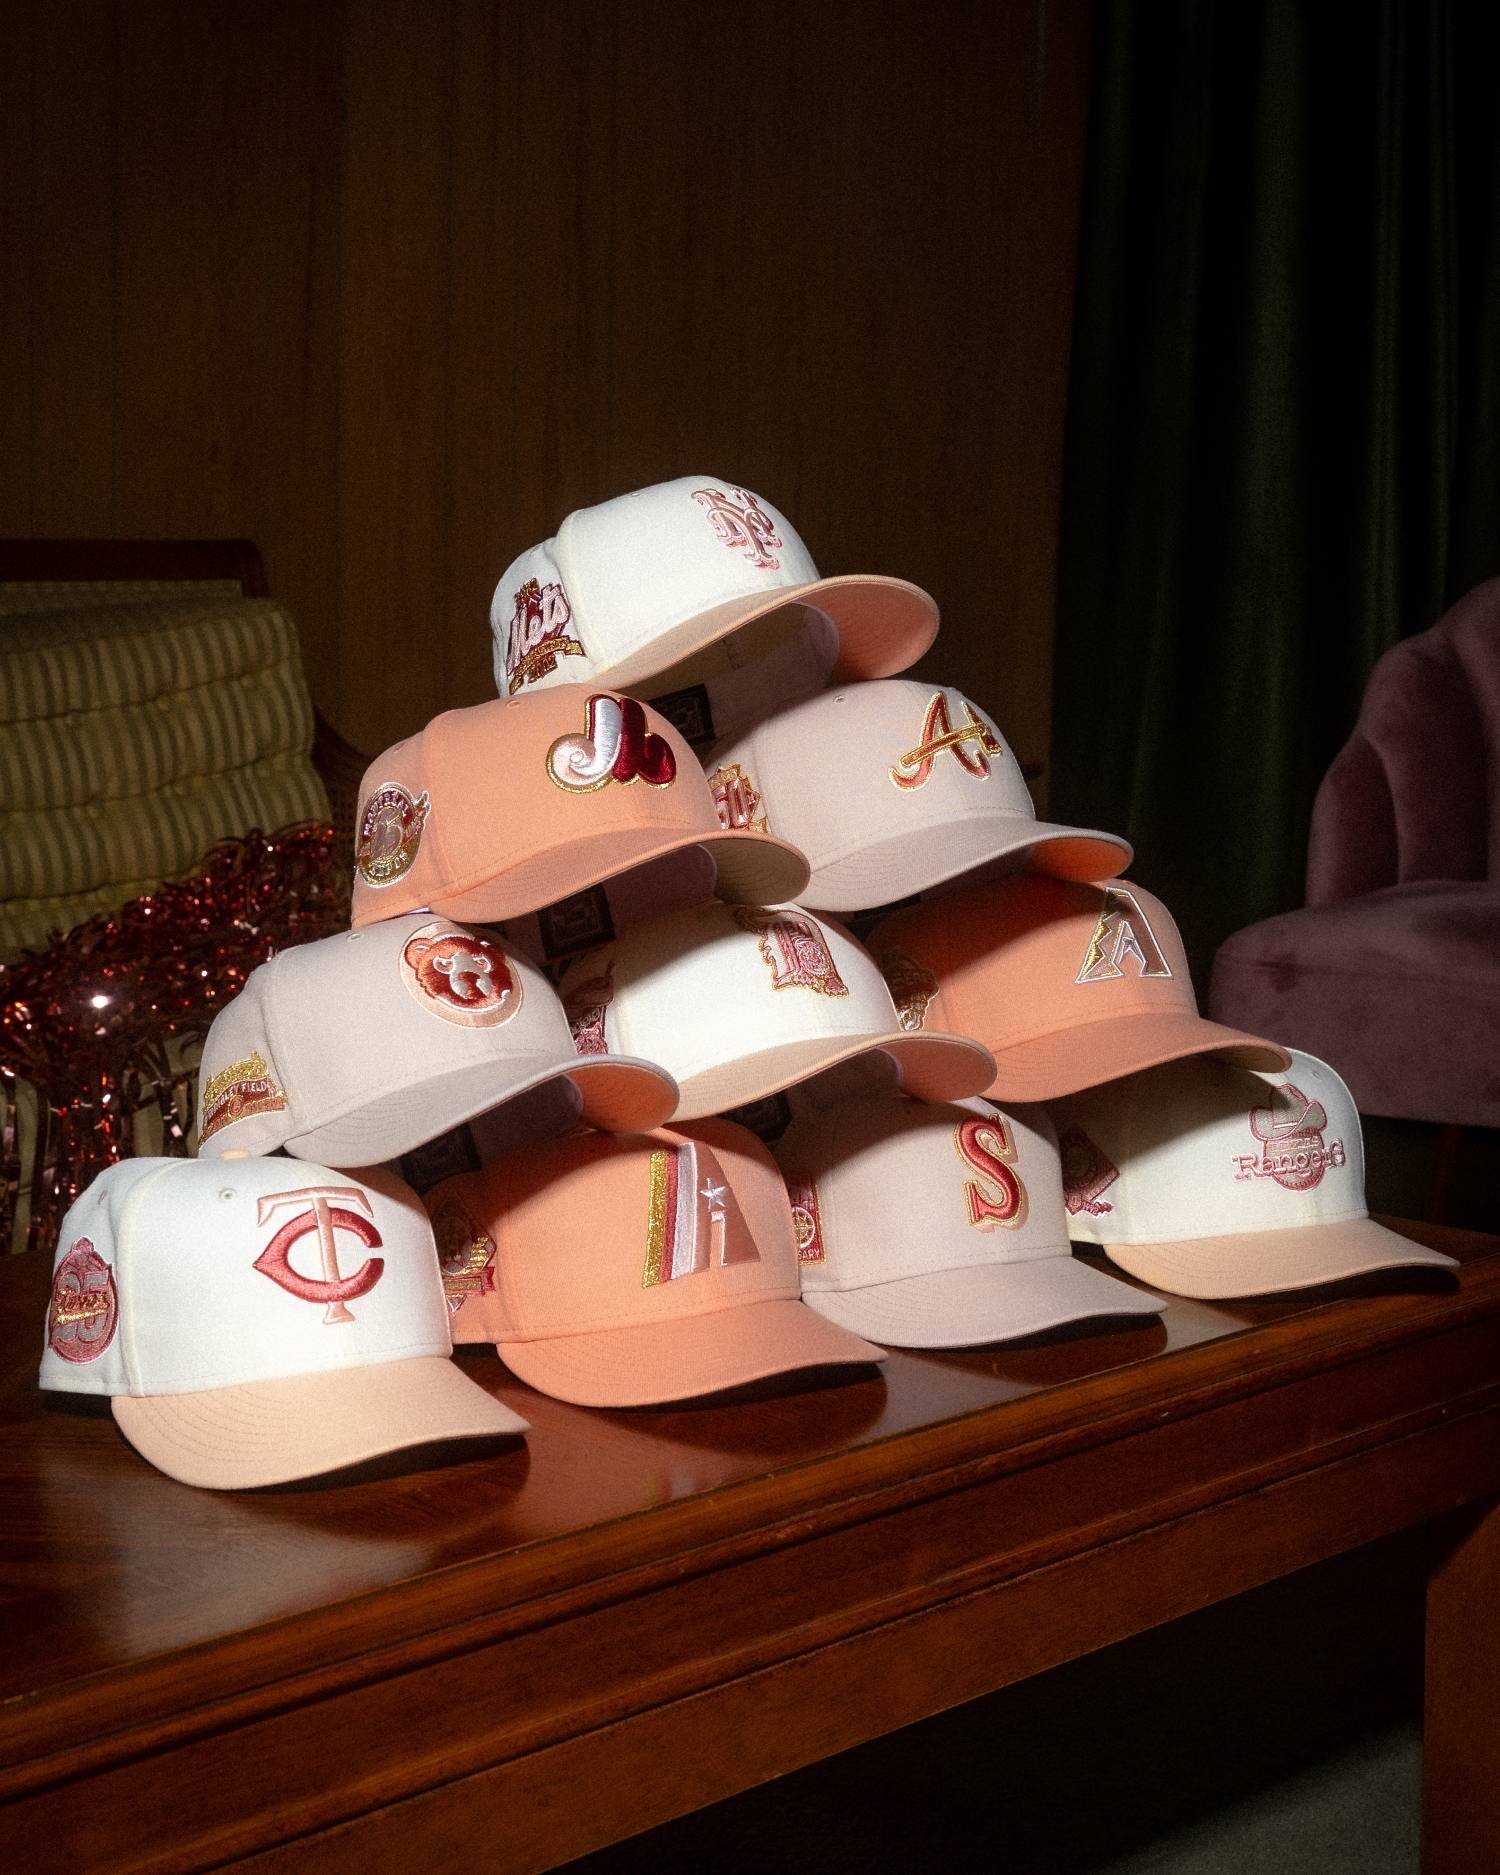 Rose Gold Fitted Hats